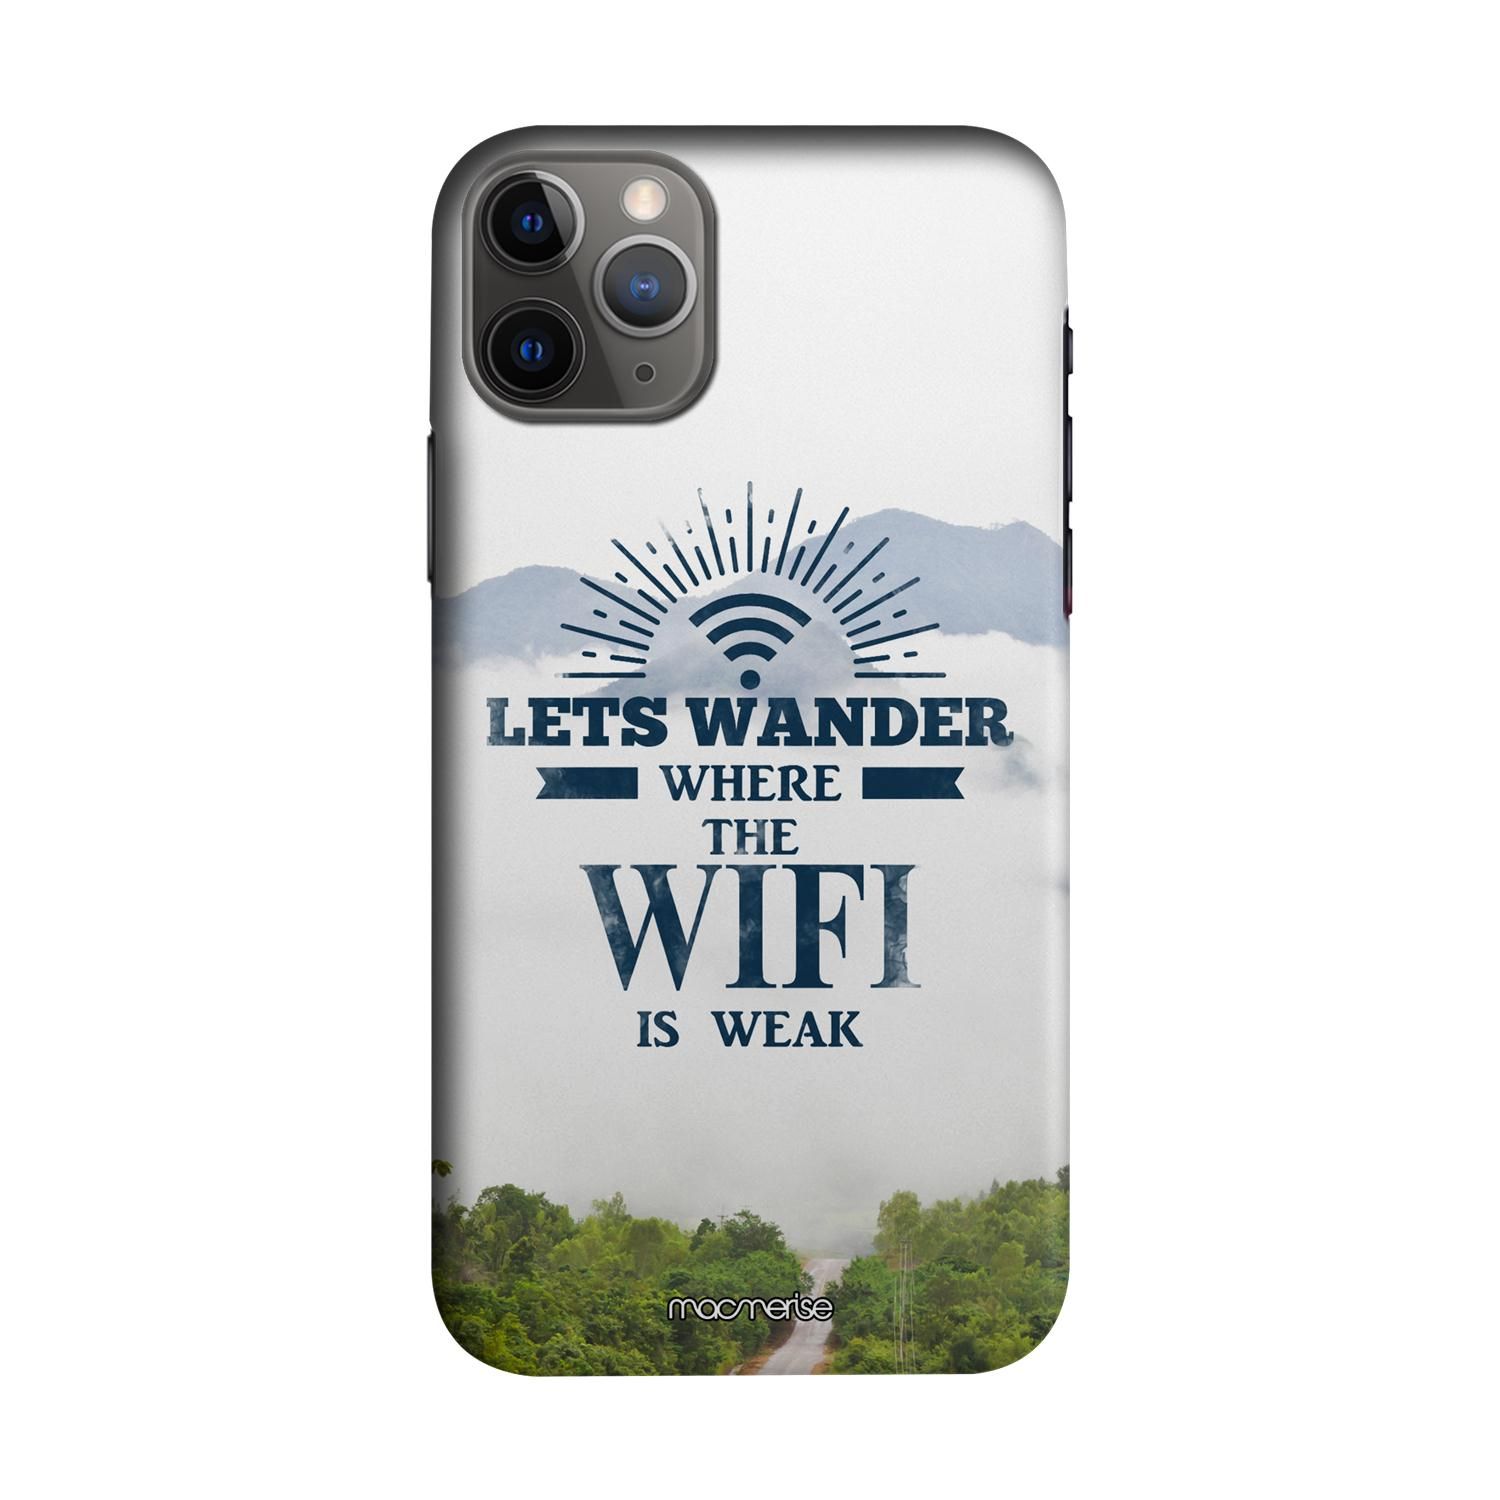 Buy Wander without Wifi - Sleek Phone Case for iPhone 11 Pro Max Online